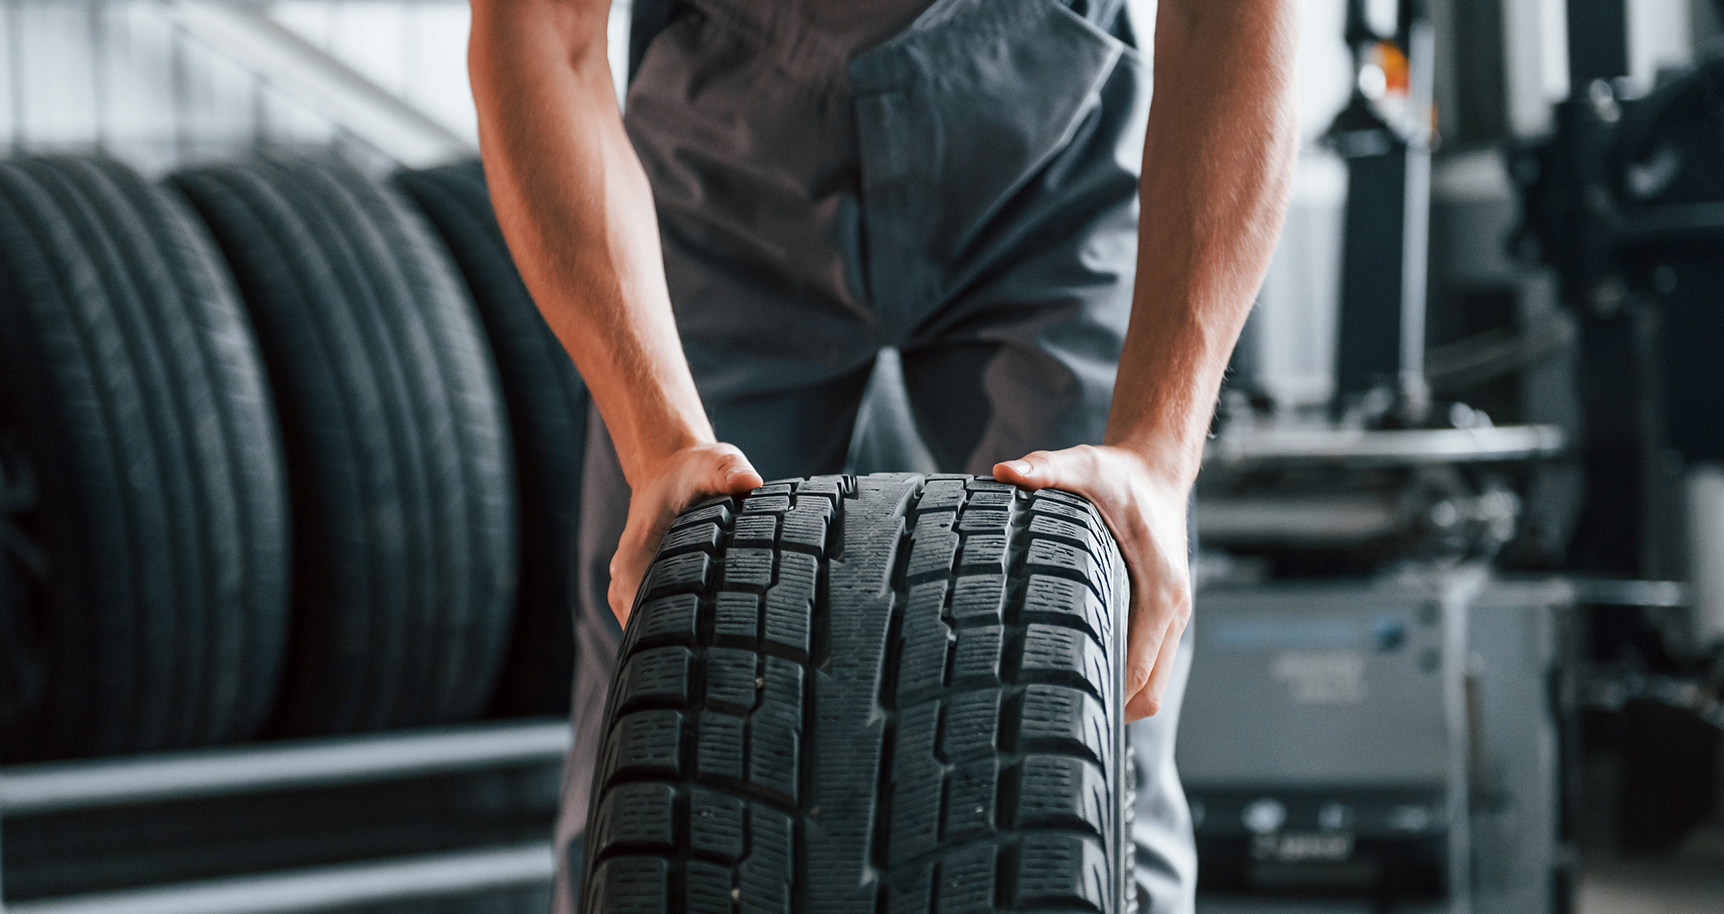 There are wheel and tire packages out there that will meet your requirements without breaking the bank.